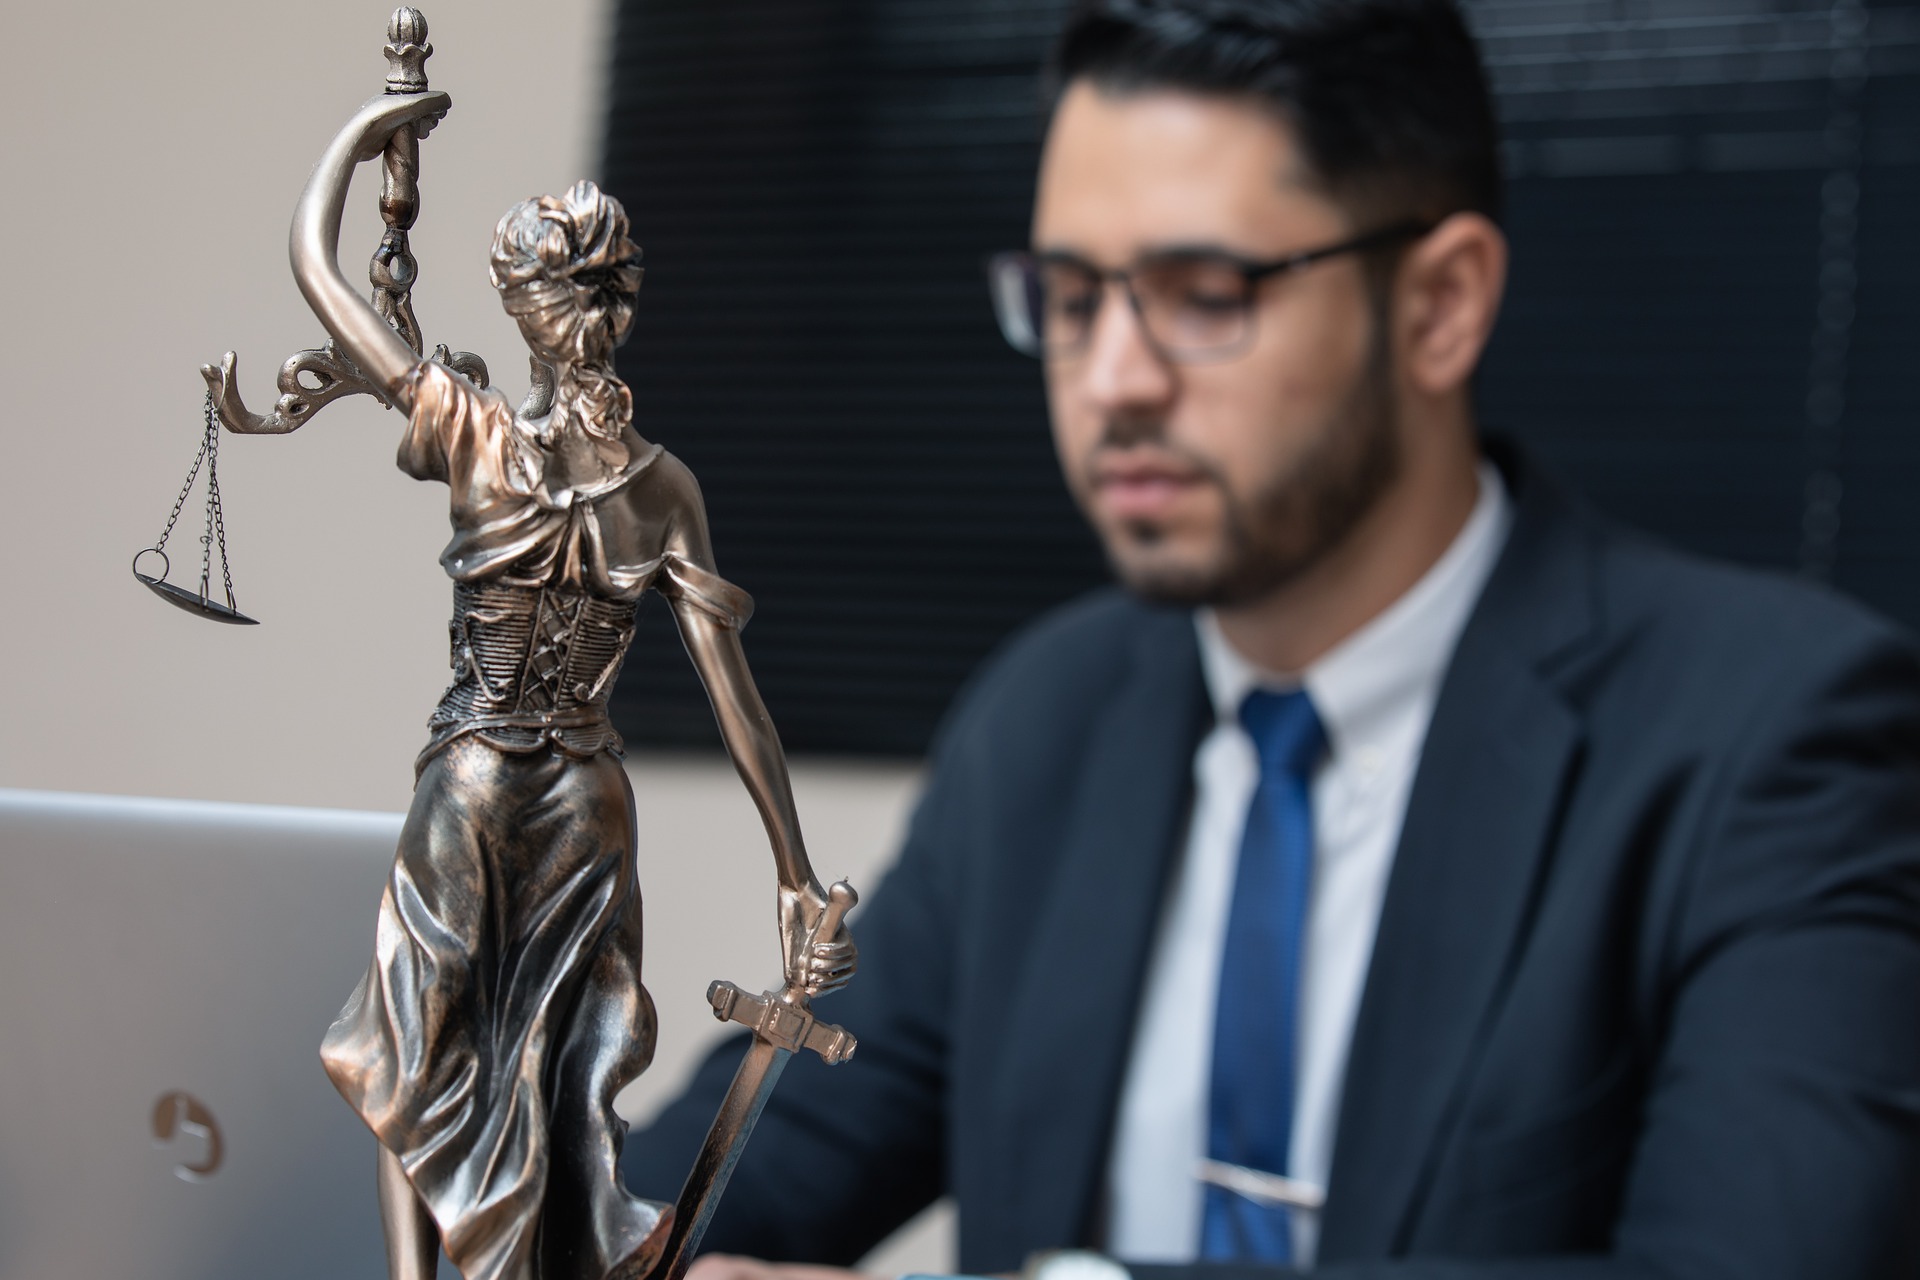 Attorney working beside Scales of Justice